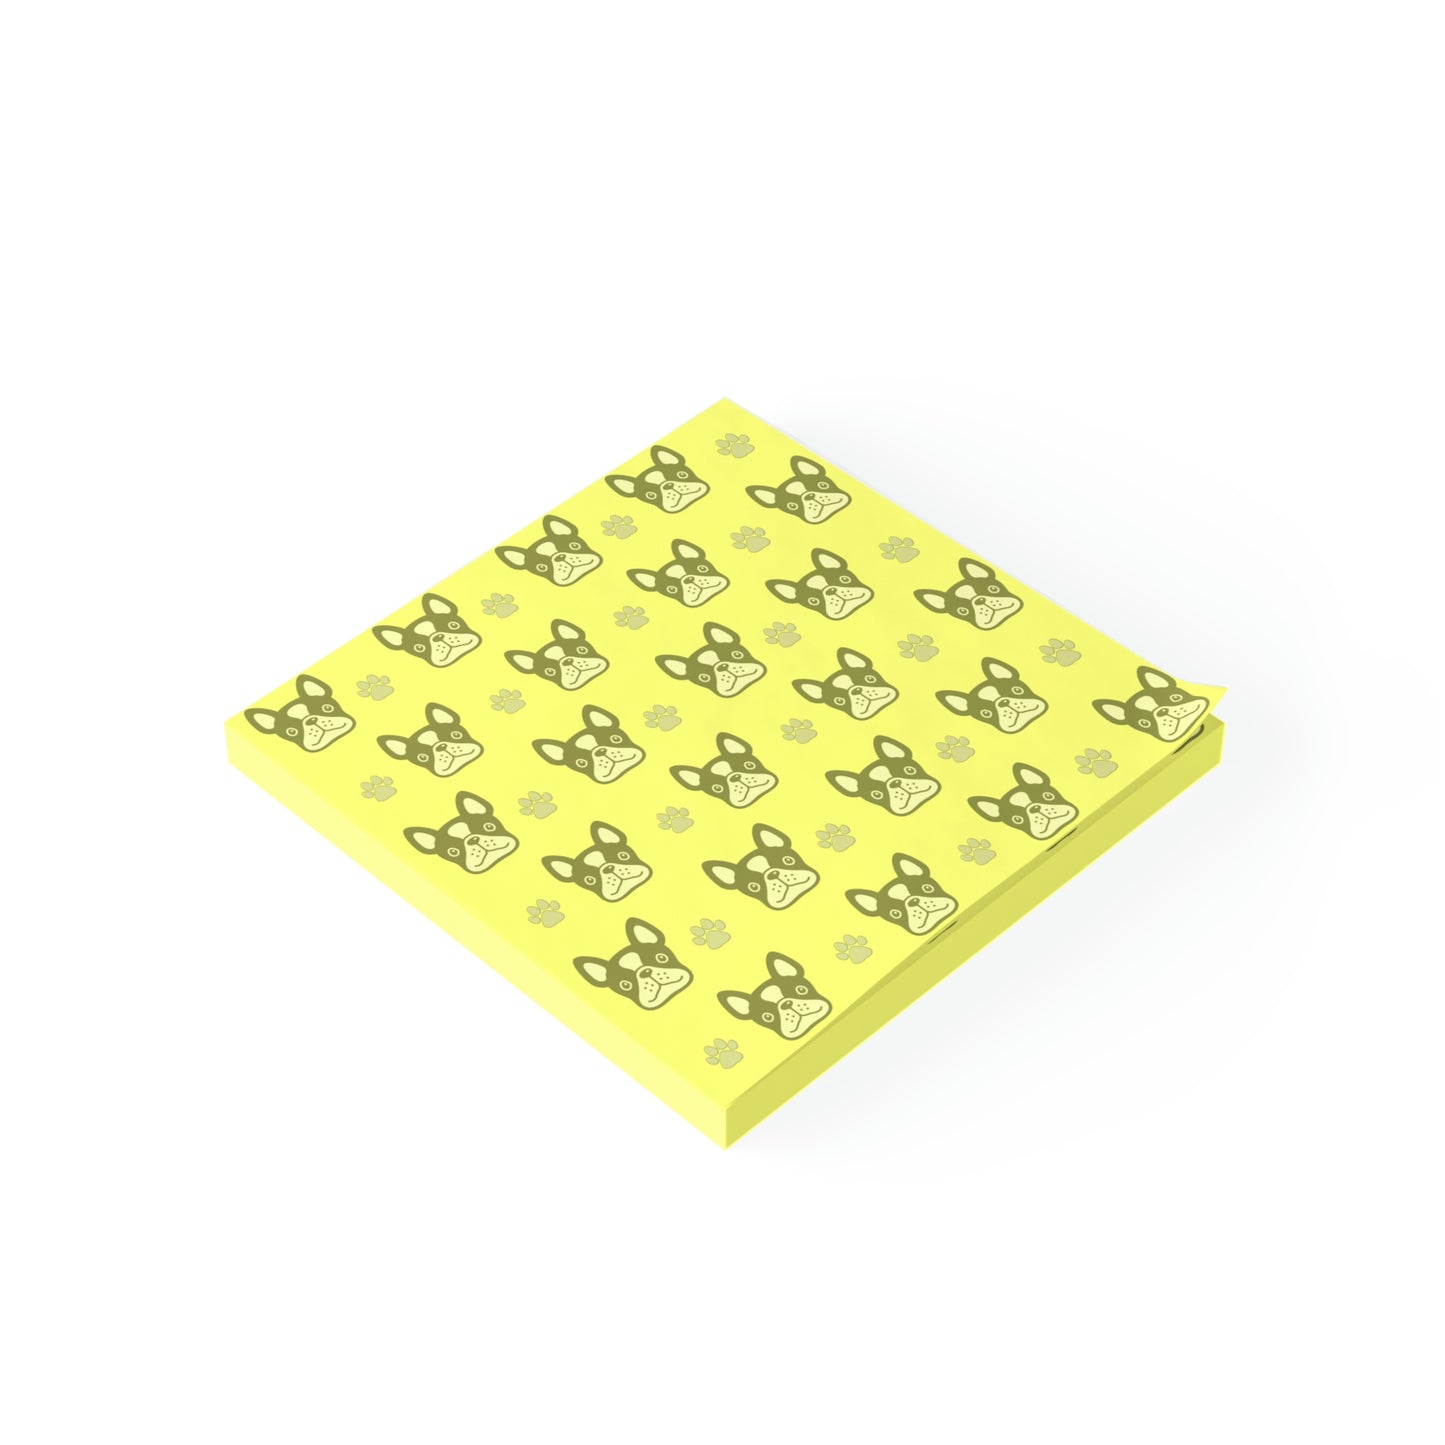 Cute Dog Faces and Paws design ( Yellow) Post-it® Note Pads